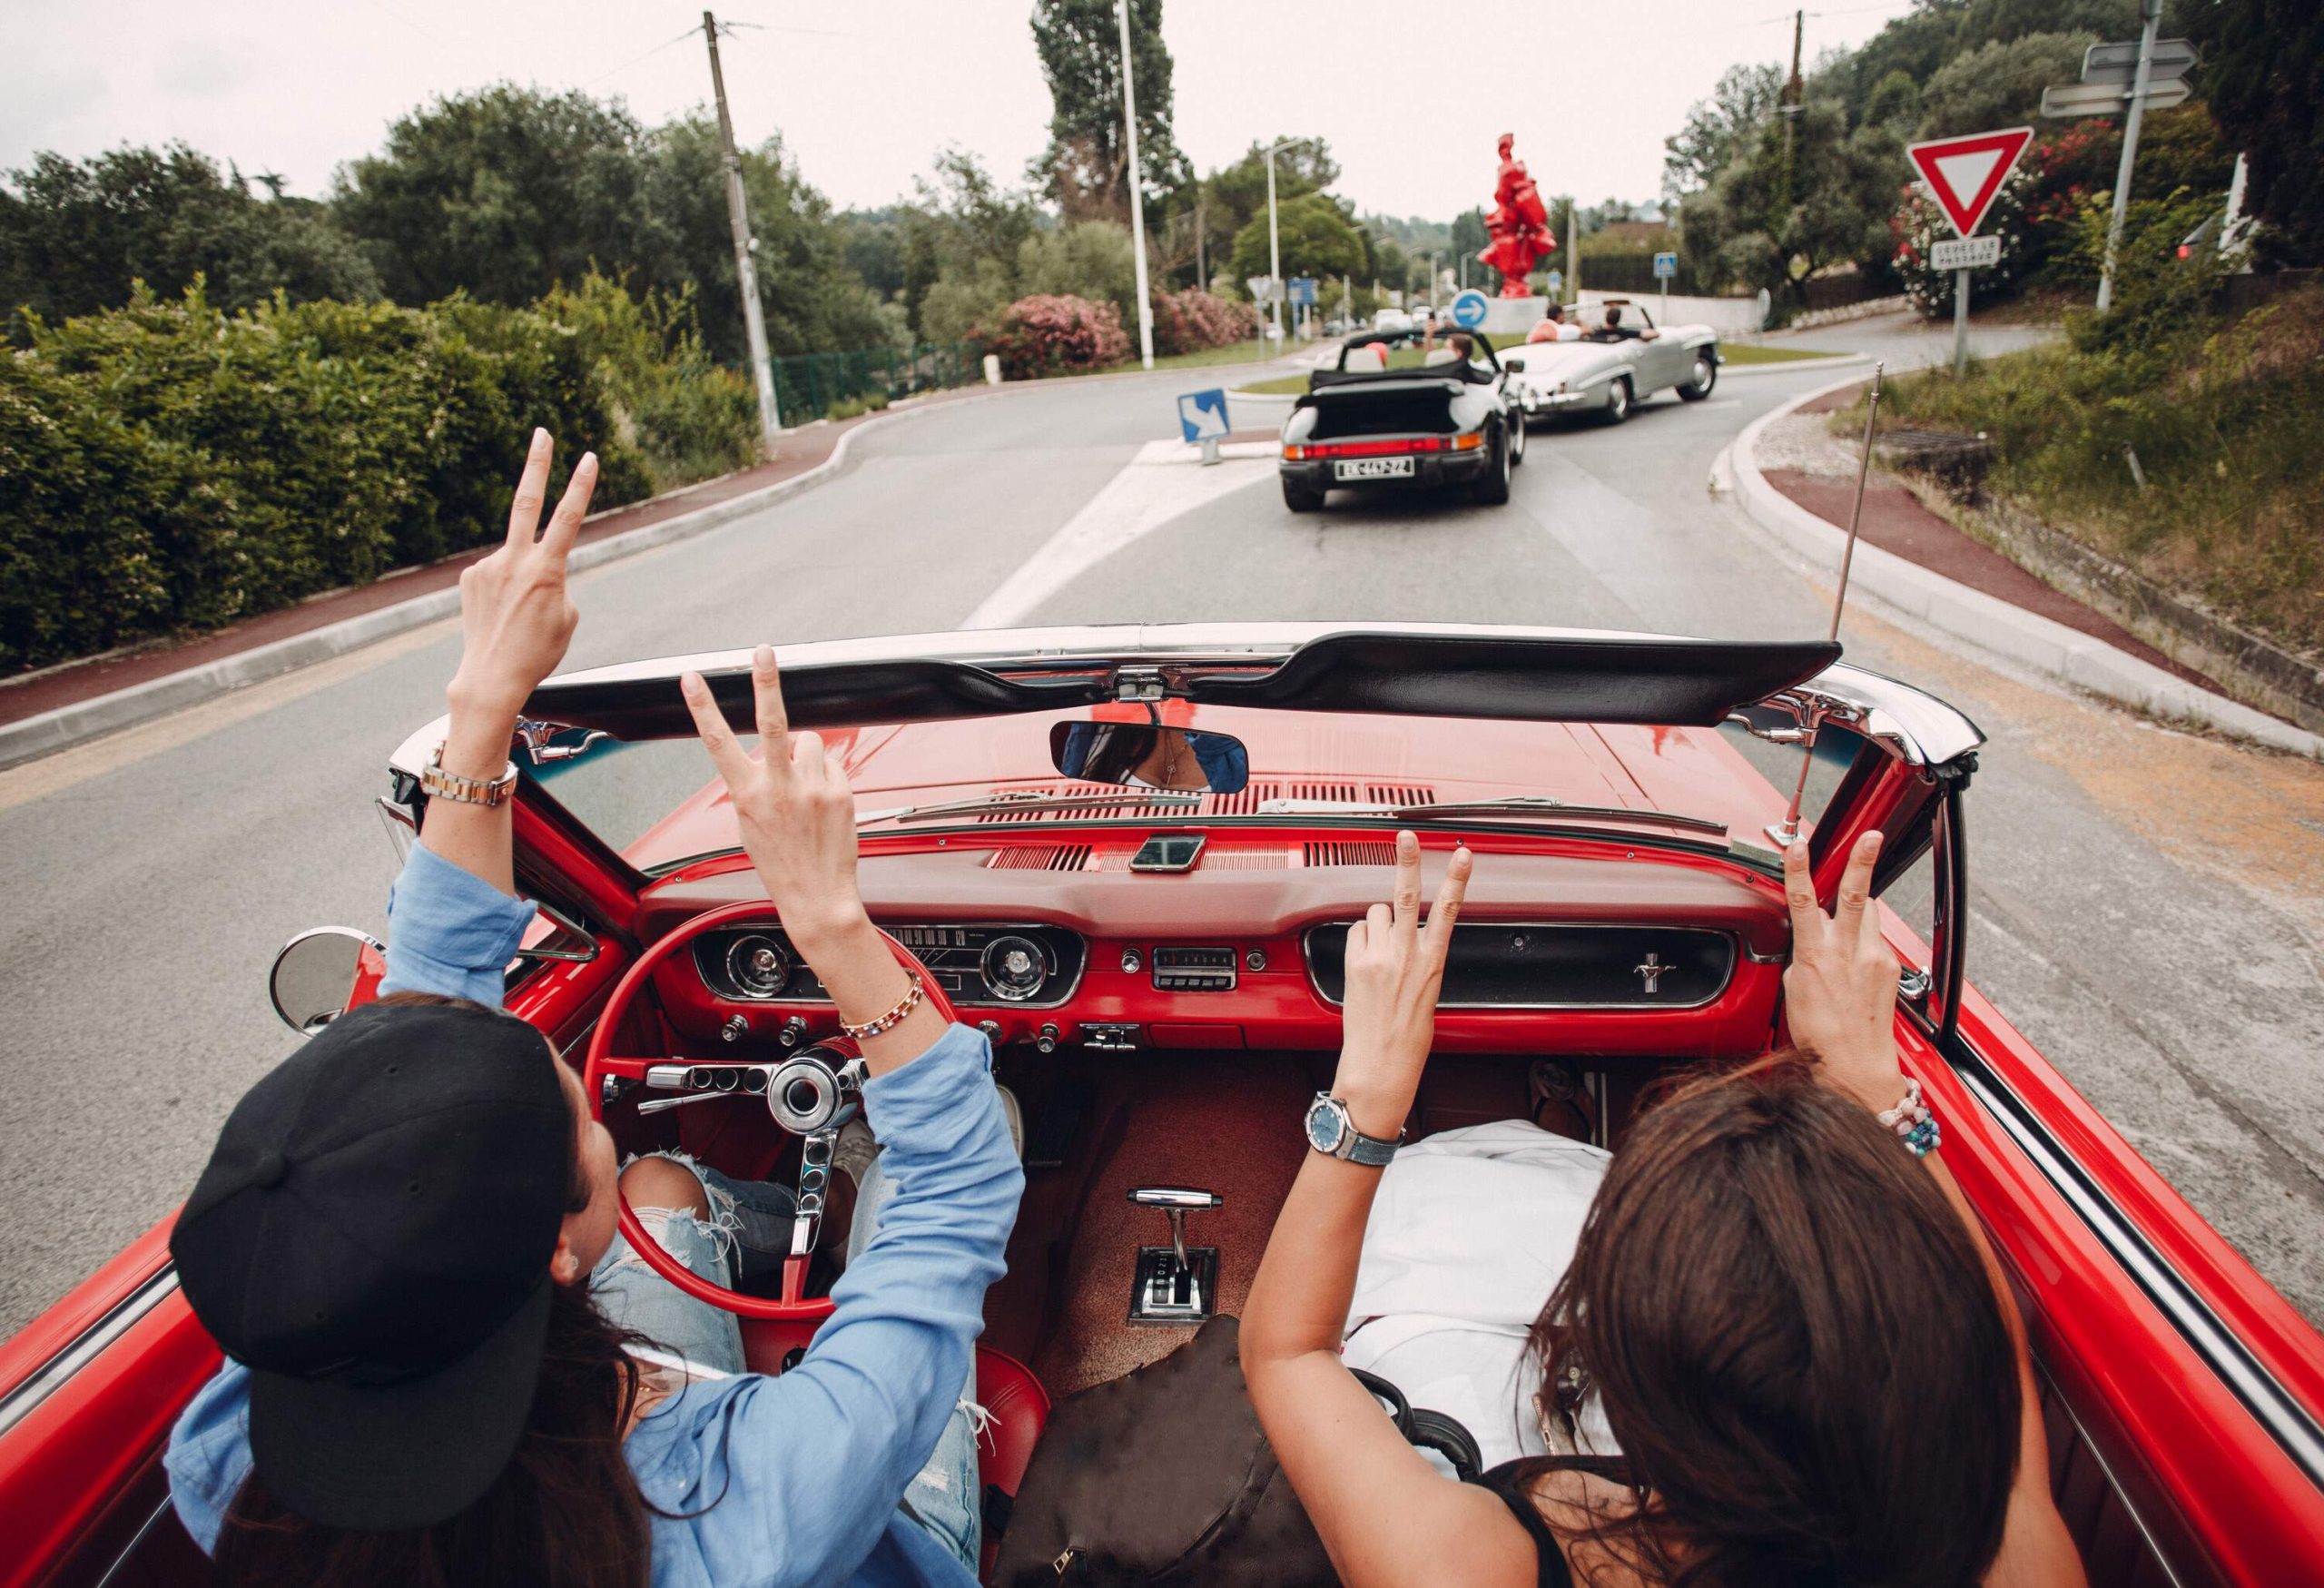 Two women in a red convertible car putting their hands up and making peace signs.